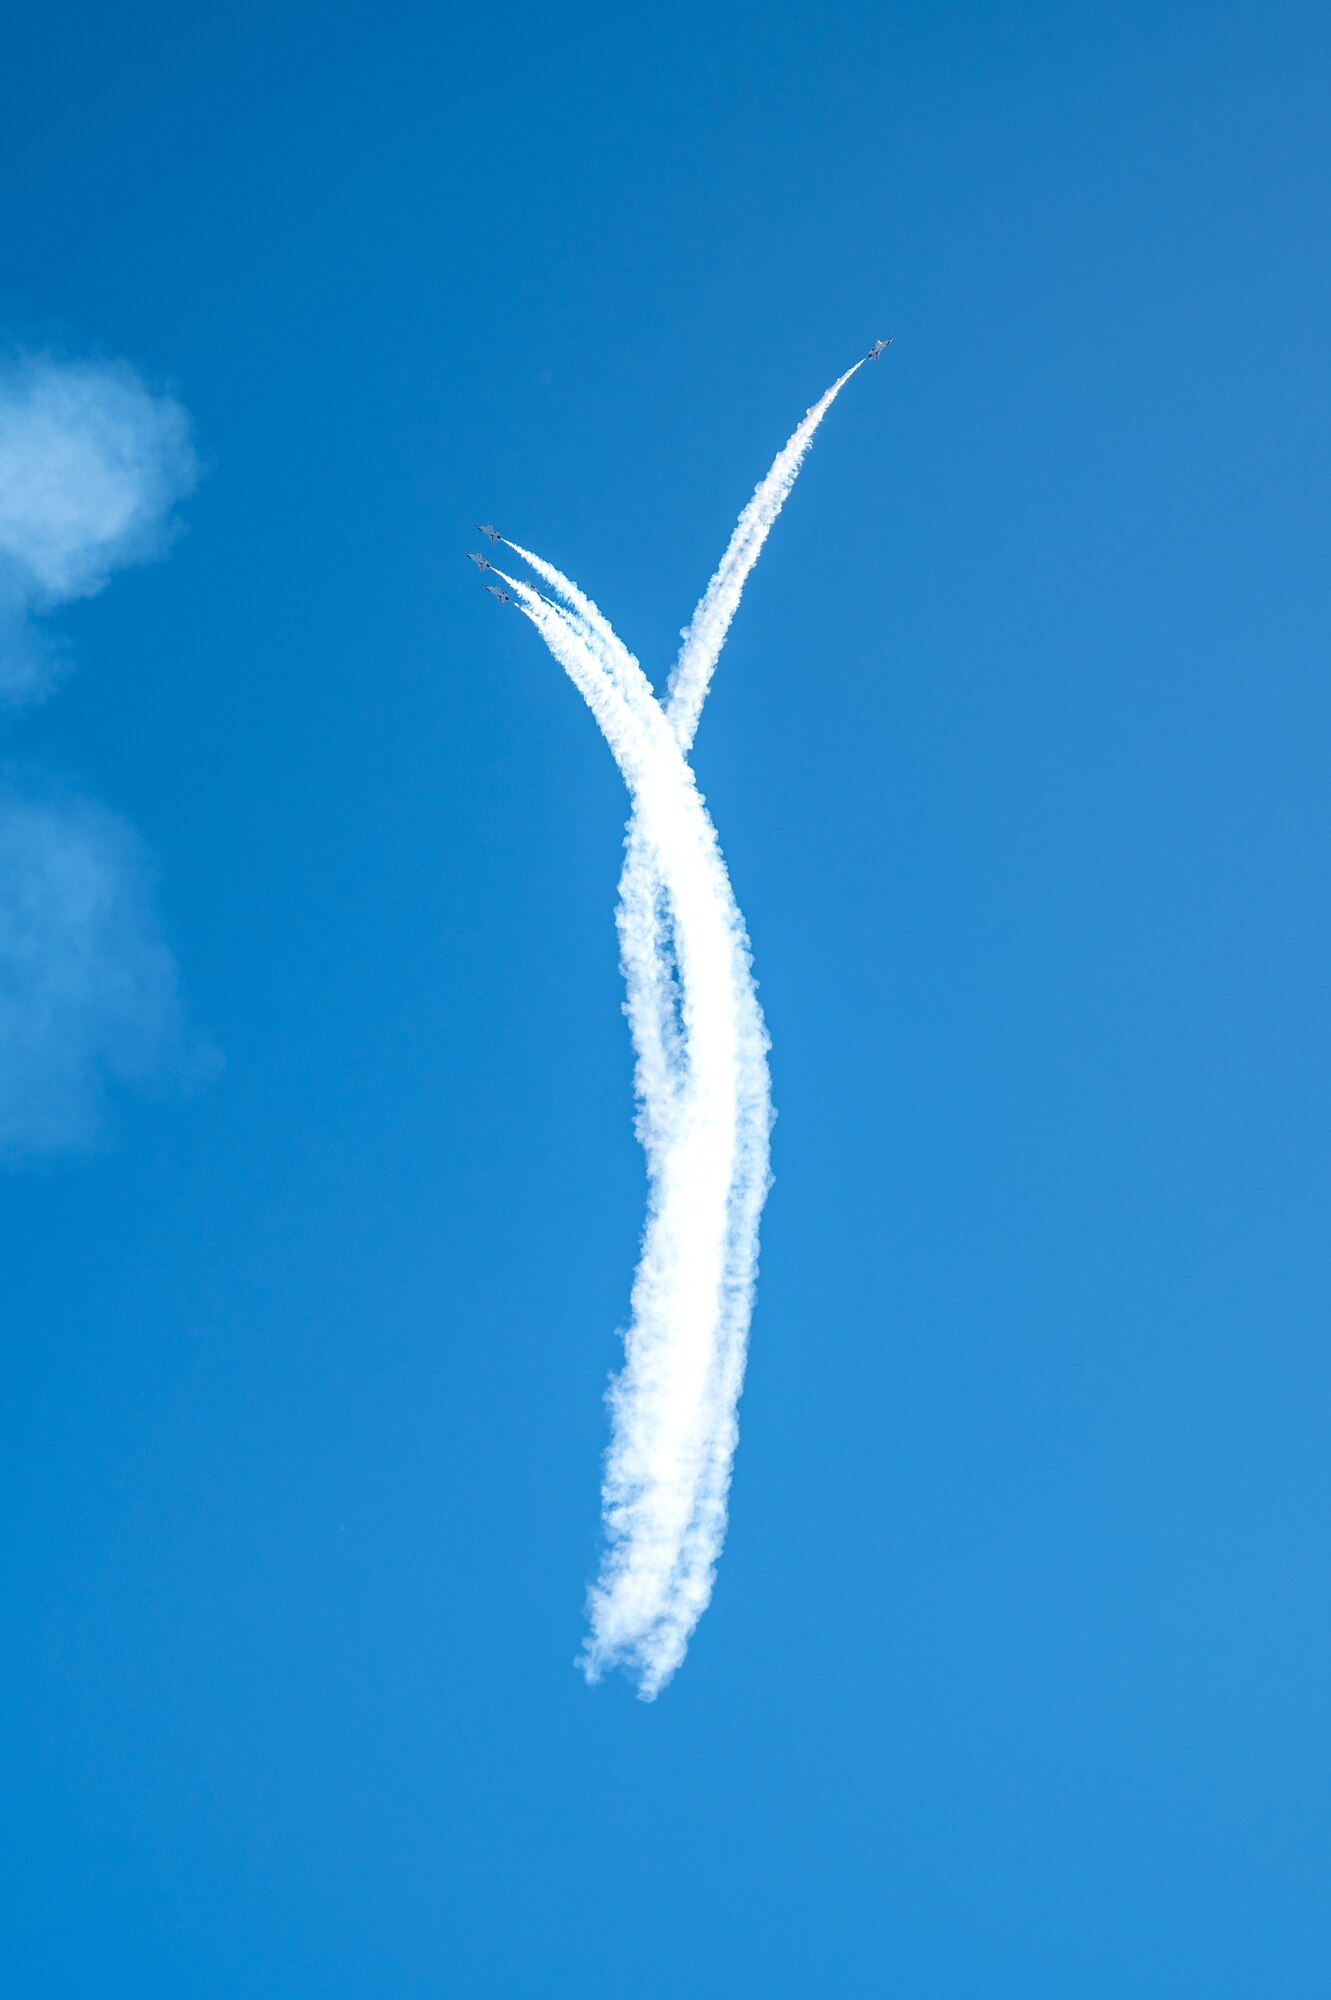 The Thunderbirds perform the high bomb burst maneuver during a practice session for the 2023 Thunder Over the Sound Air and Space Show at Biloxi Beach in Biloxi, Mississippi, April 28, 2023. Thunder Over the Sound is a unique event where a military installation and its surrounding city jointly host an air show in two locations; Biloxi Beach and Keesler's flightline. (U.S. Air Force photo by Airman 1st Class Trenten Walters)